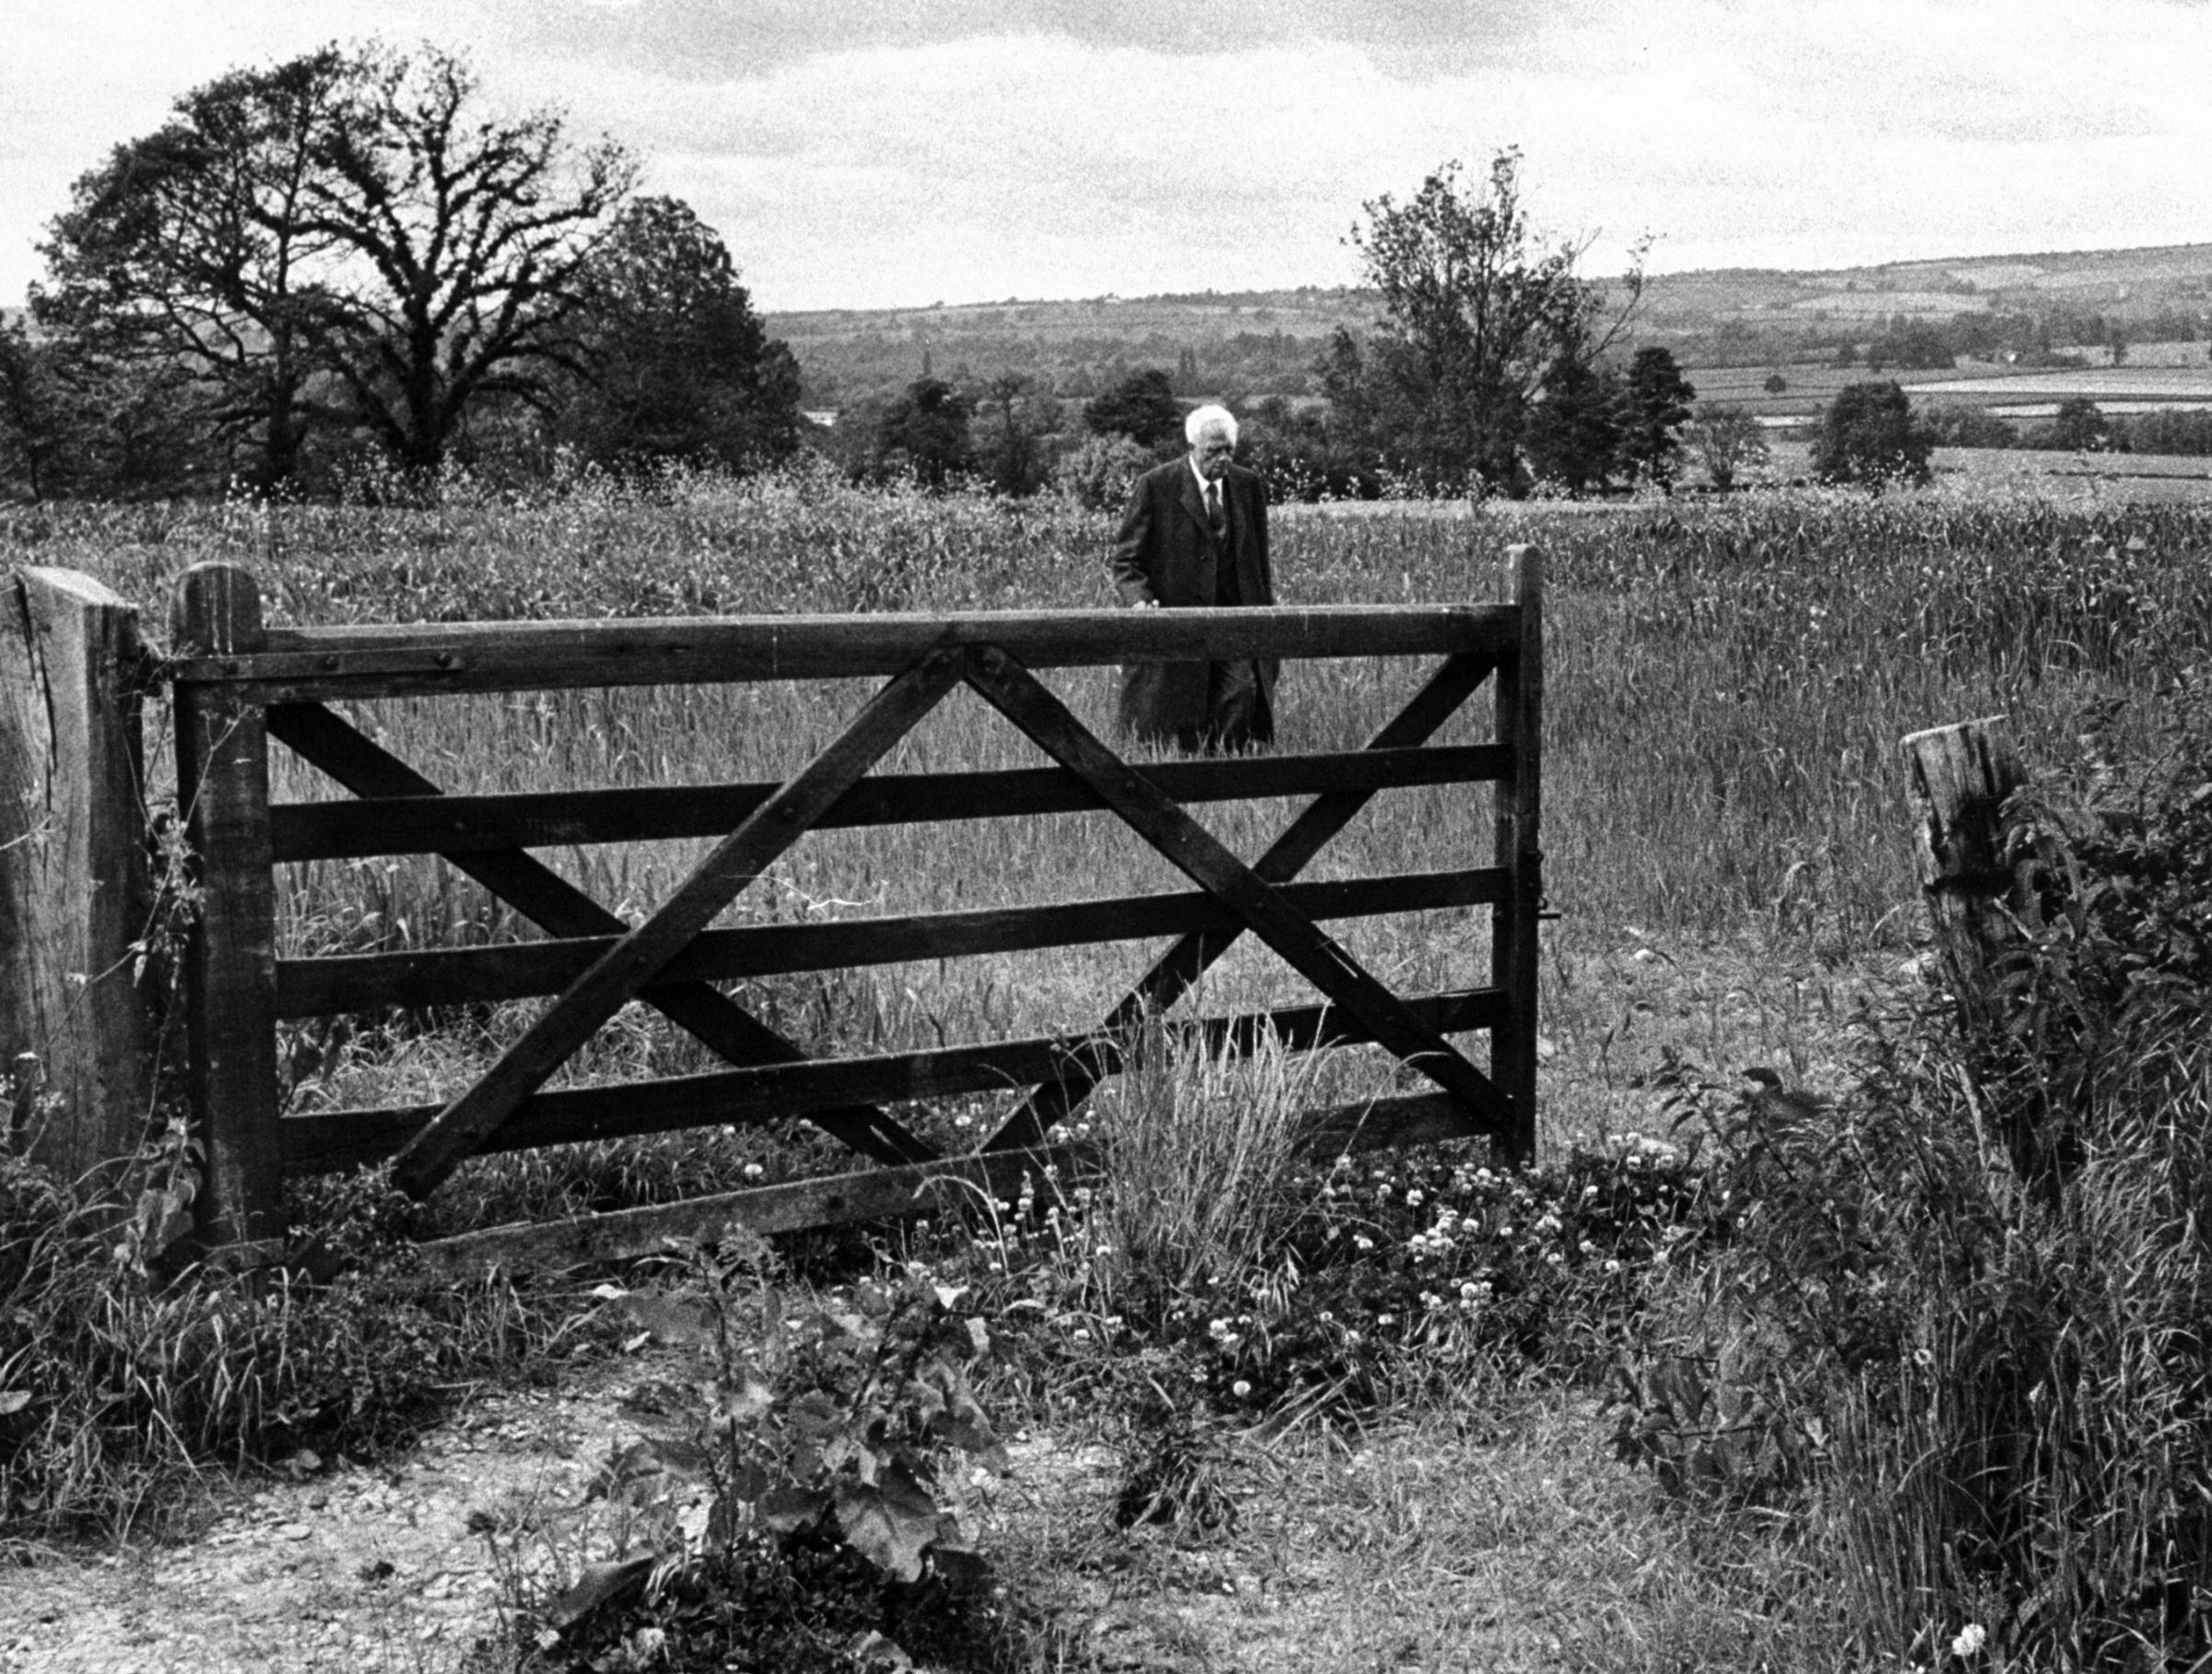 Robert Frost in 1957, during a visit to the English countryside where he once lived.